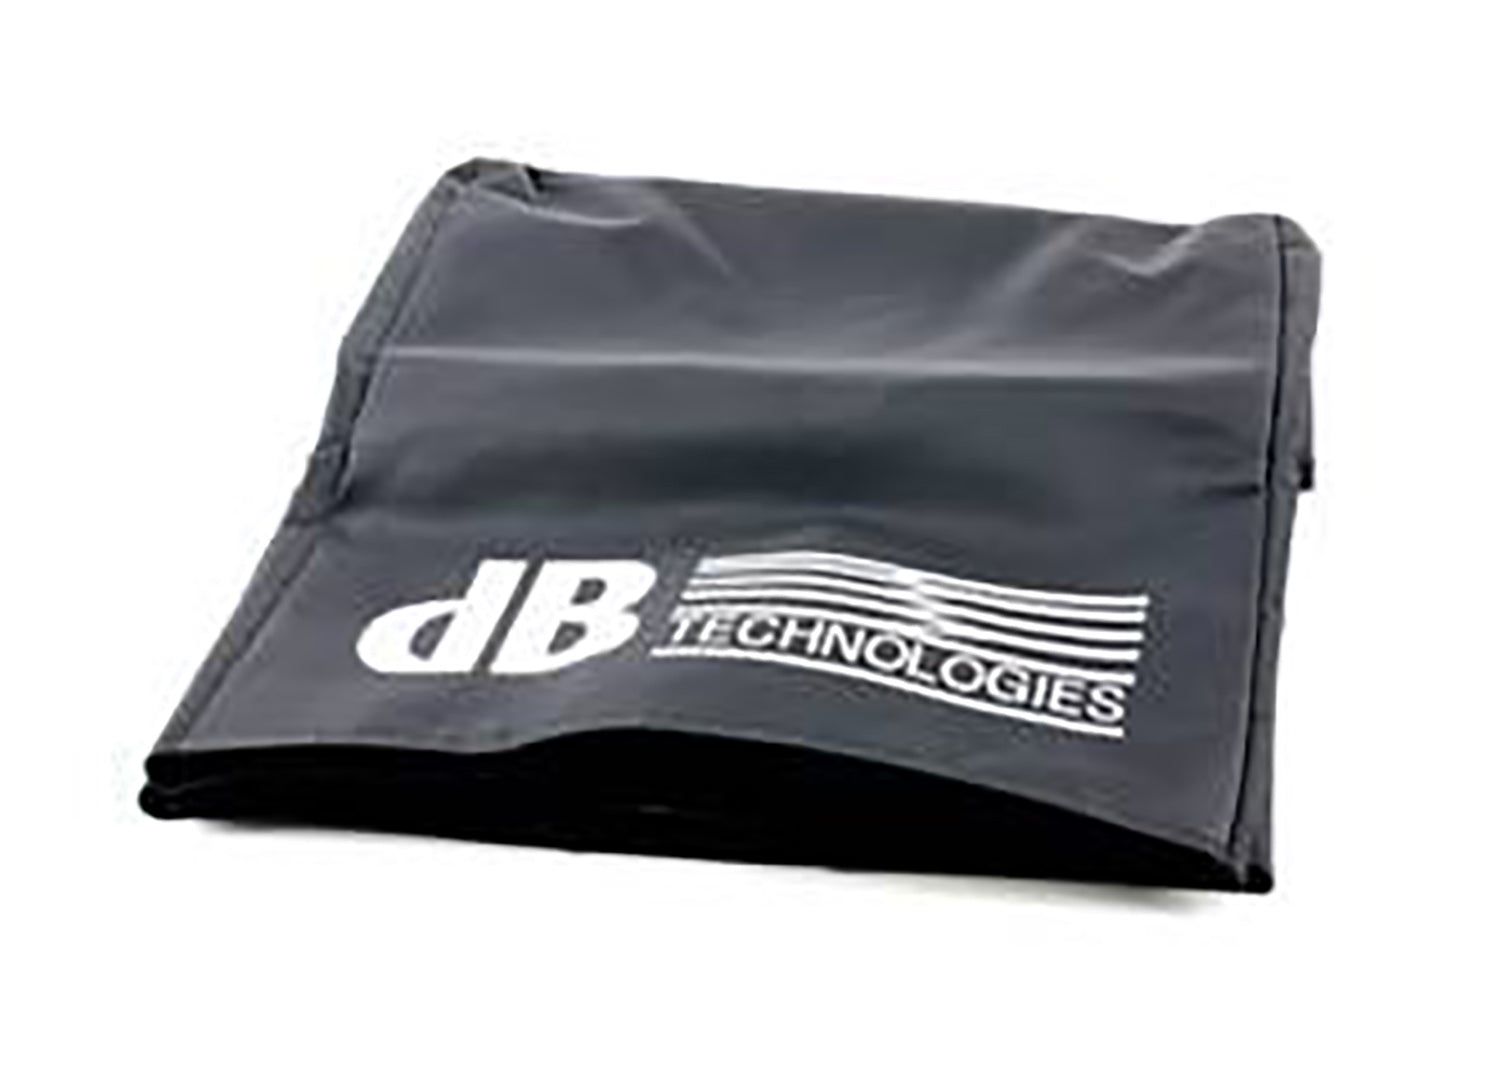 dB Technologies TC 09S Padded Cover for DVA S09 Subwoofer - Hollywood DJ